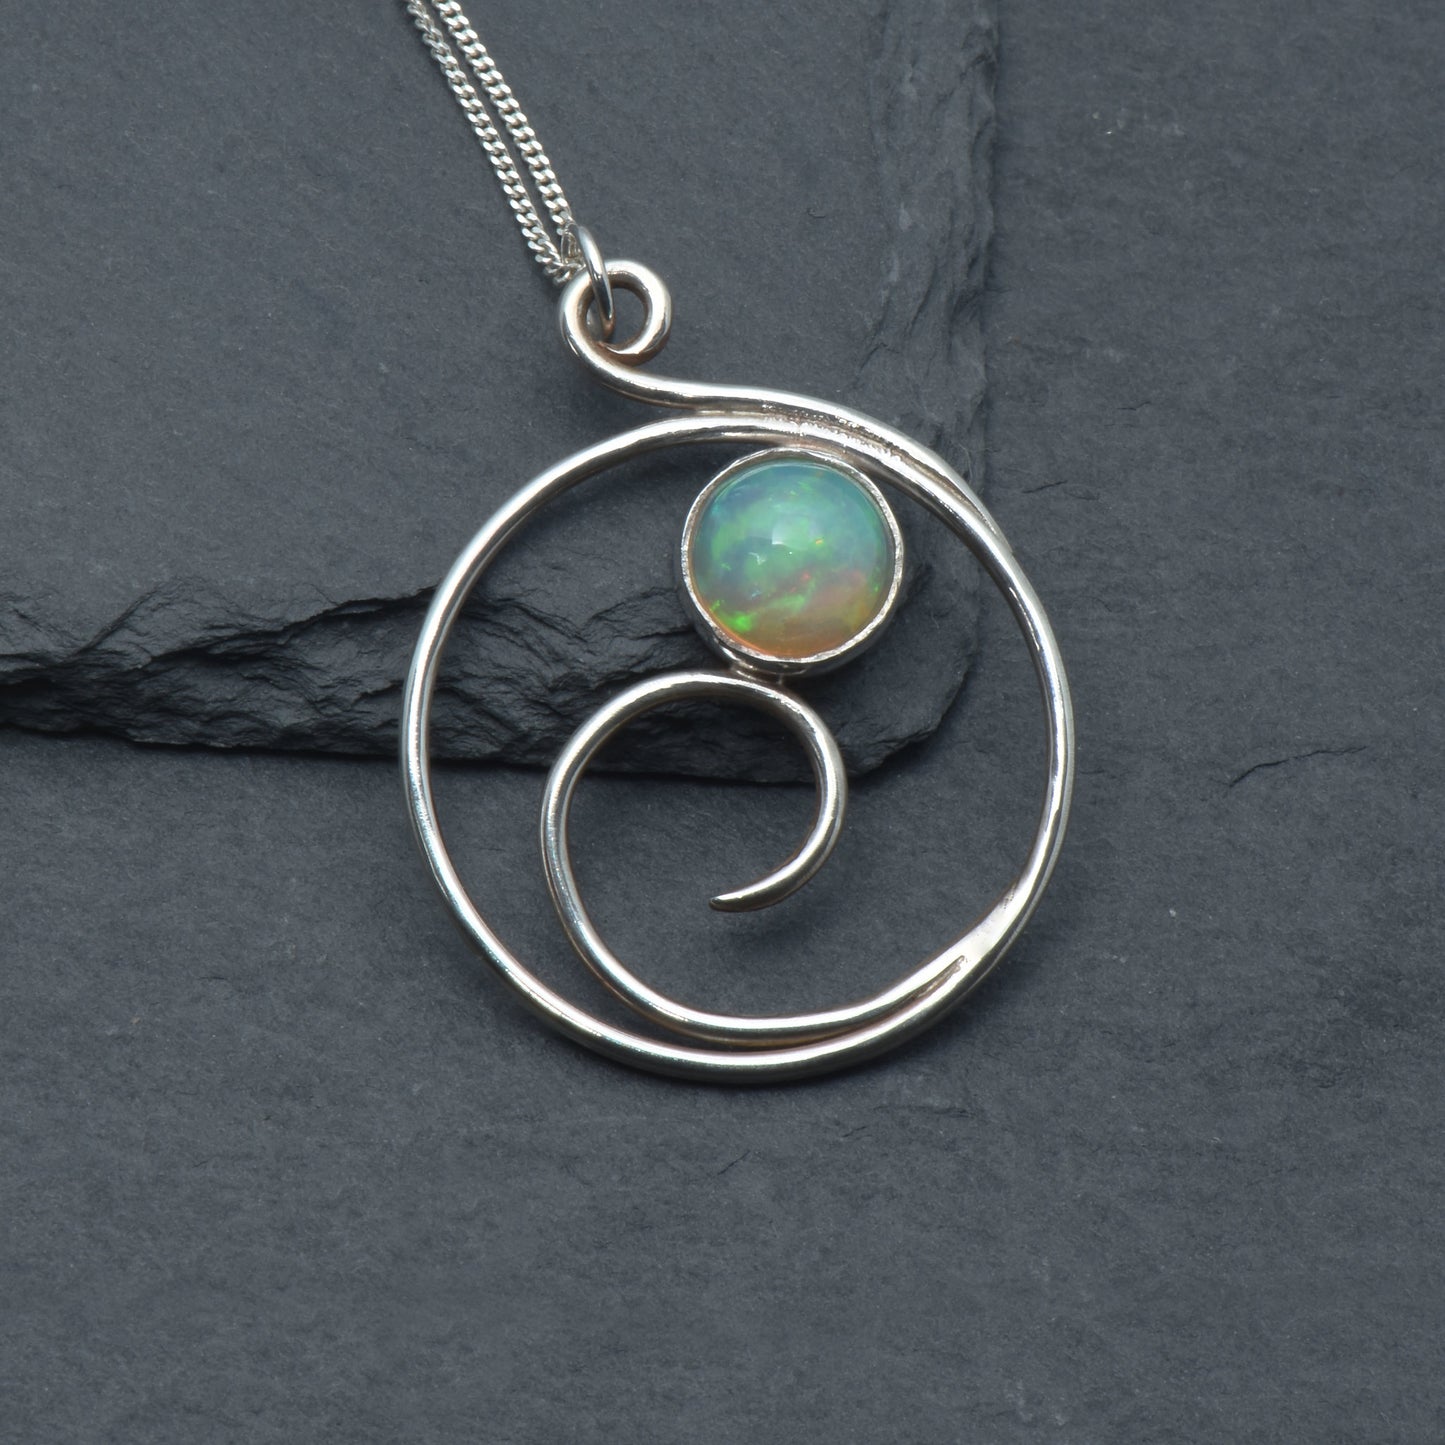 Opal pendant with wave design on a slate background